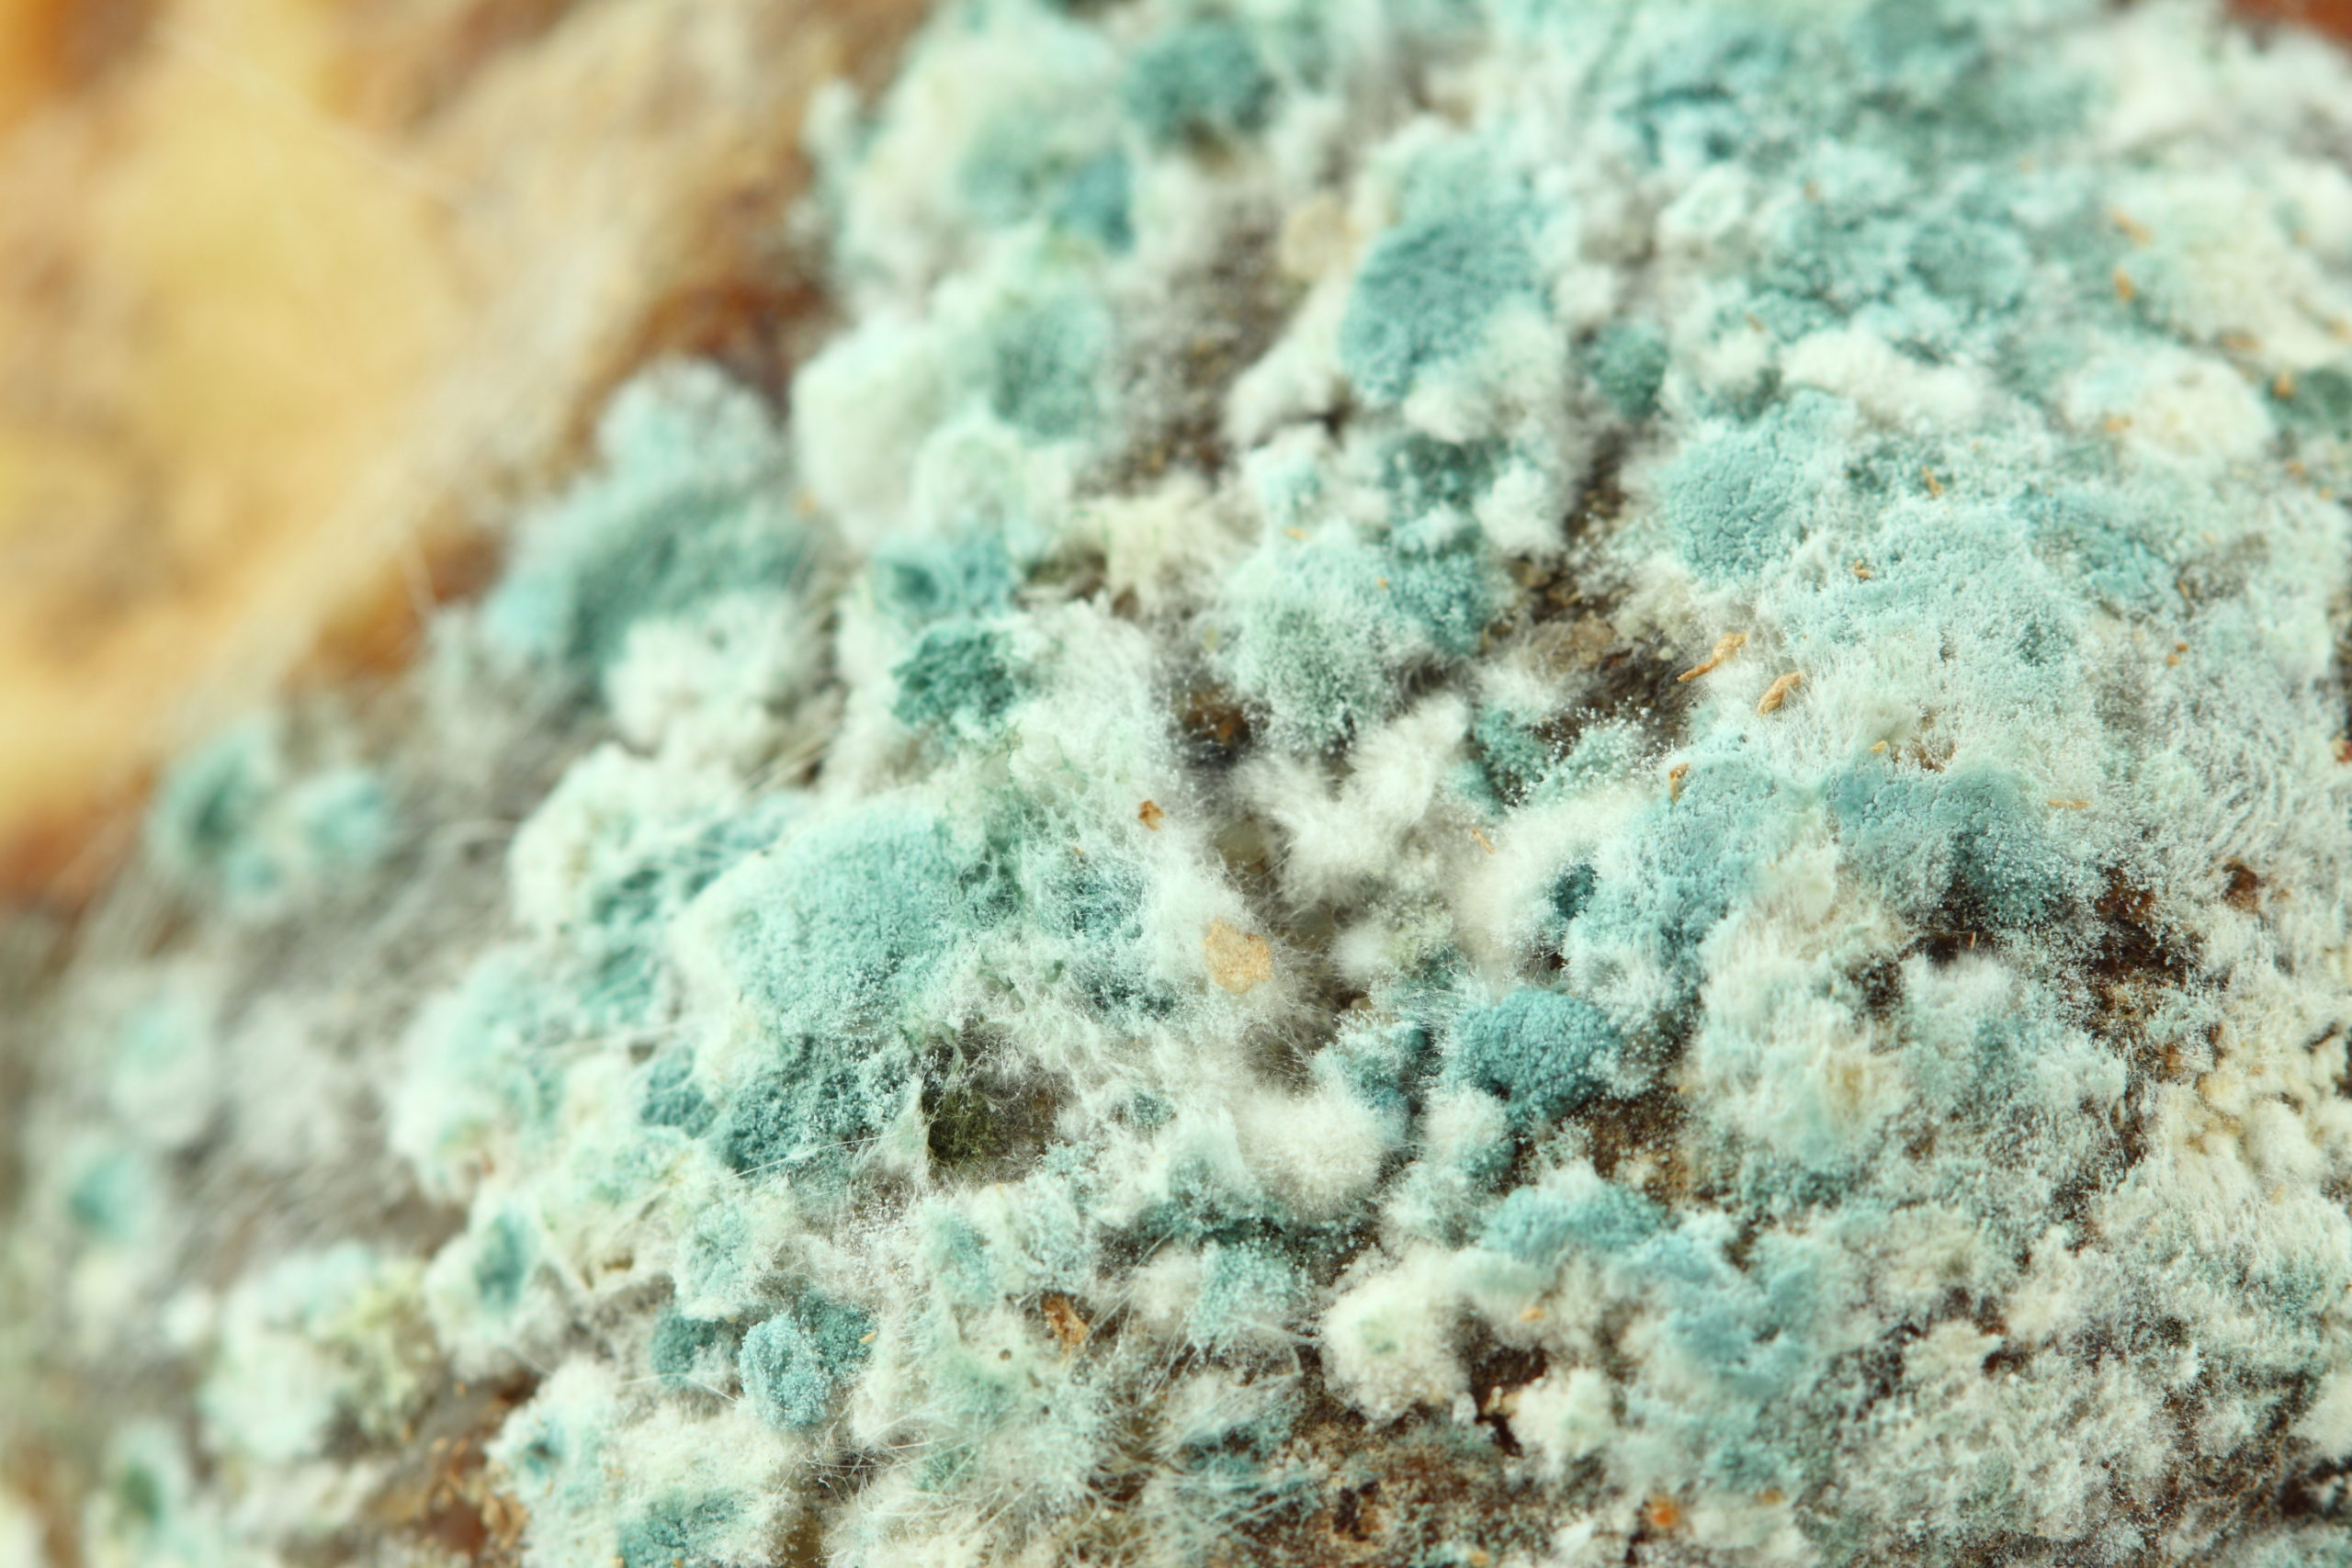 Close-up of fuzzy green mold.